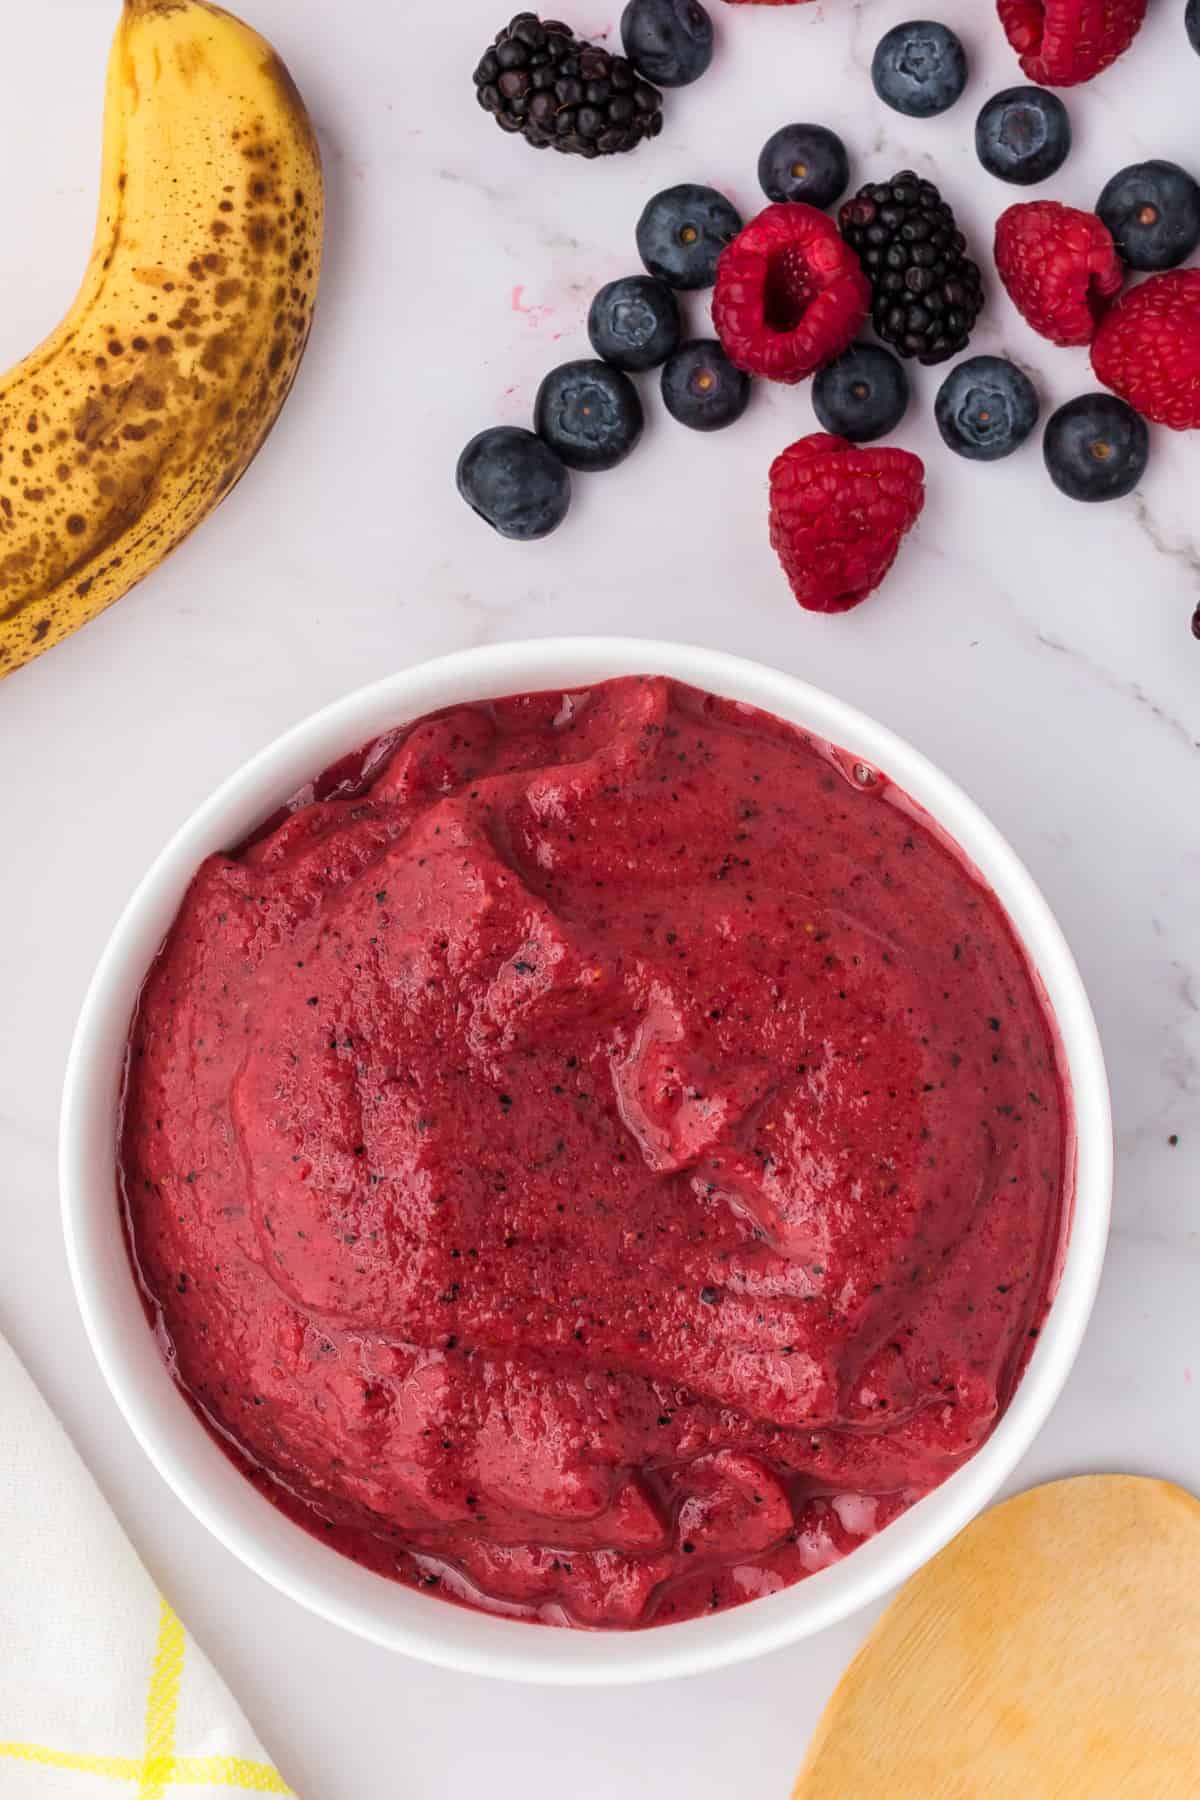 Berry smoothie bowl with no toppings.